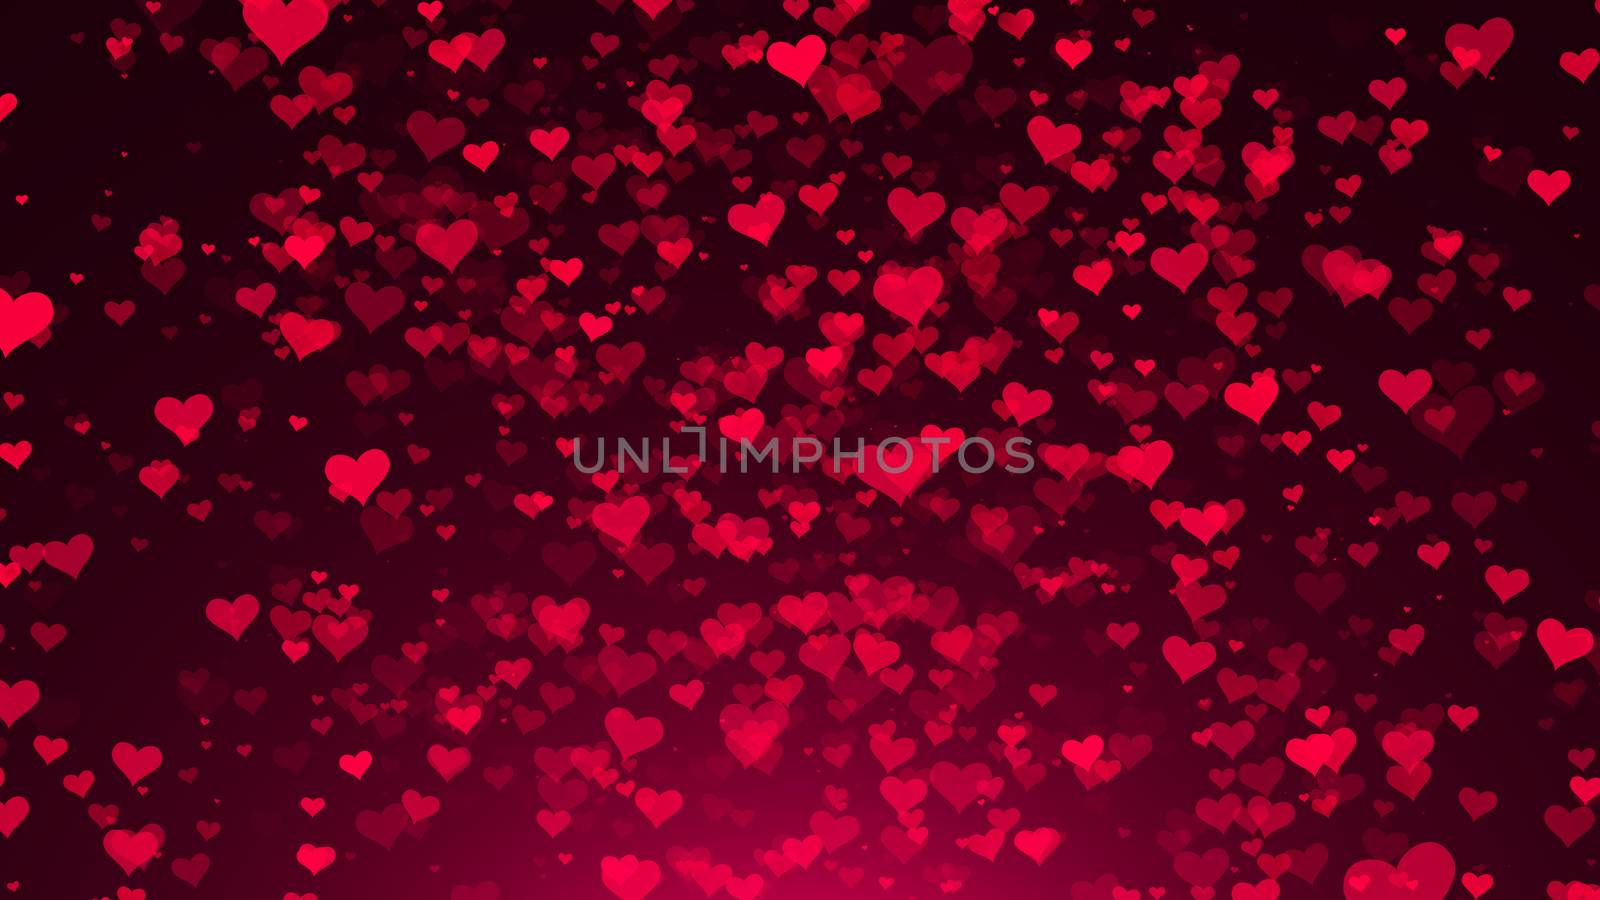 Abstract background with hearts. Digital illustration. 3d rendering